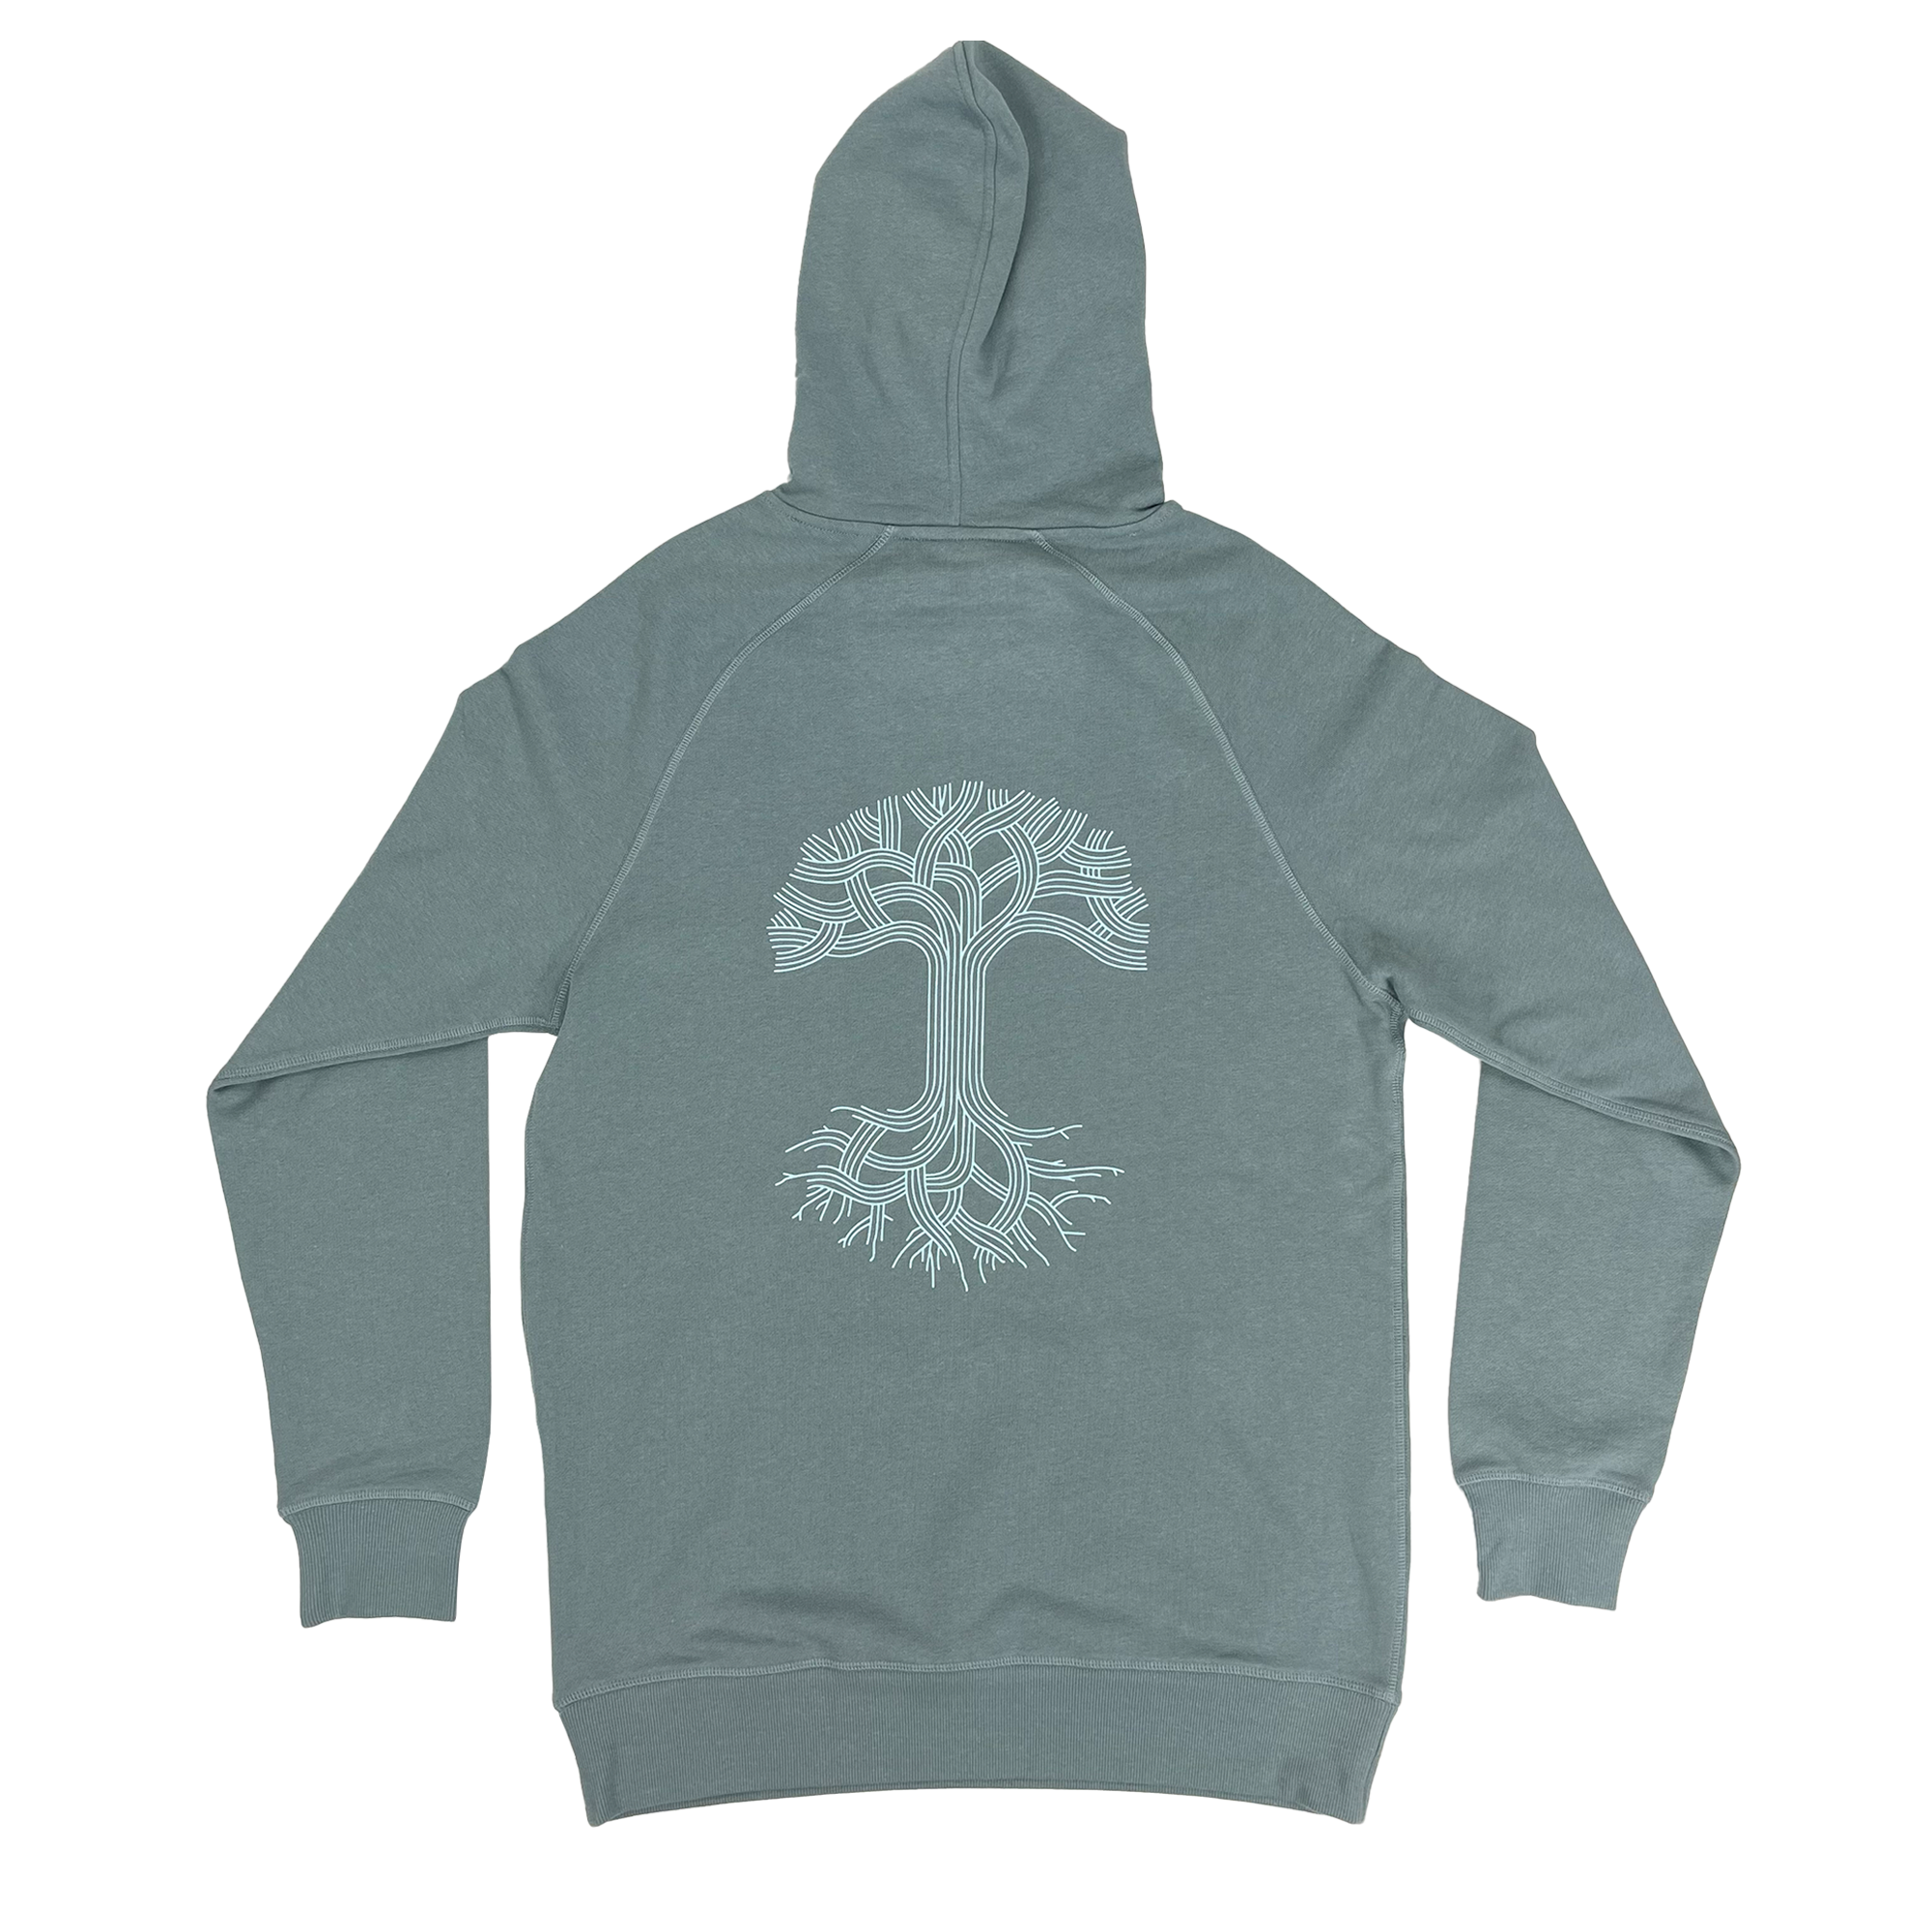 Back view of Premium pullover Hoodie - Classic Oaklandish, mineral